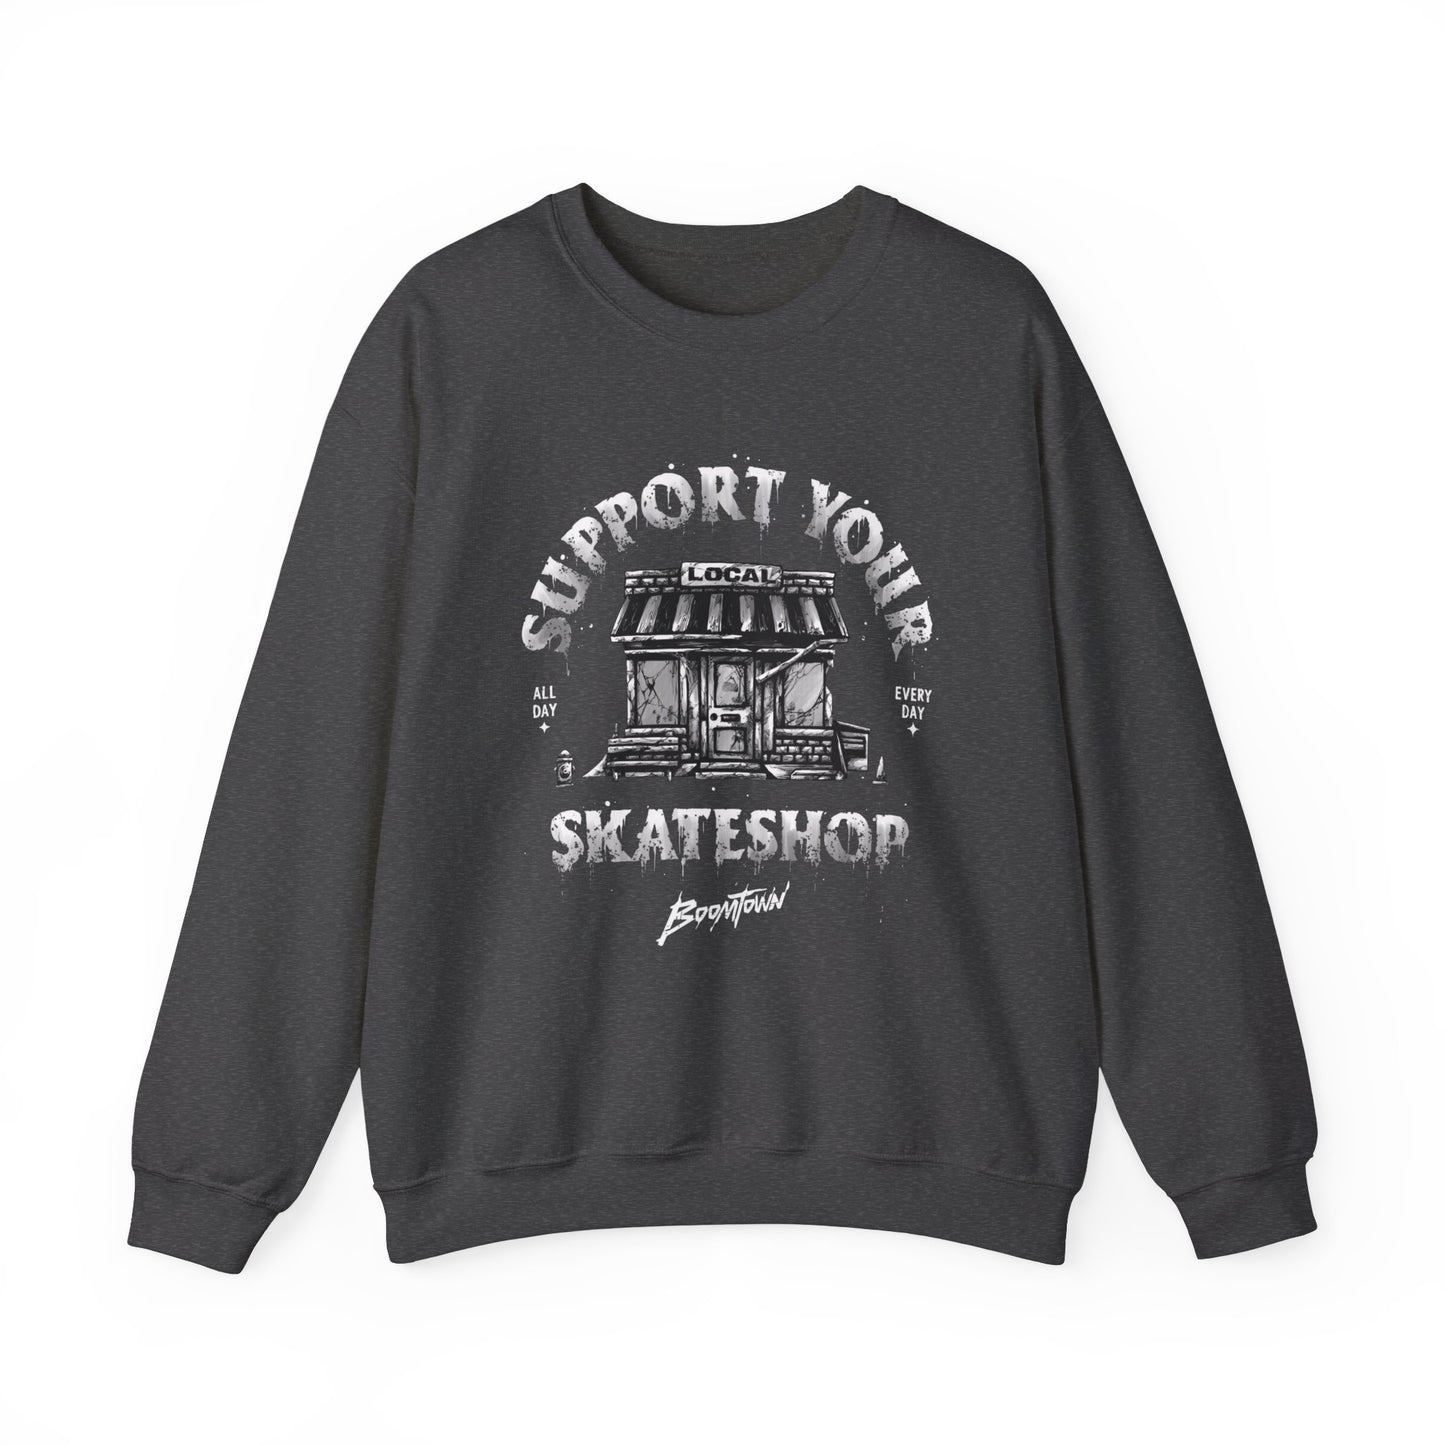 Support Your Local Skate Shop Crewneck